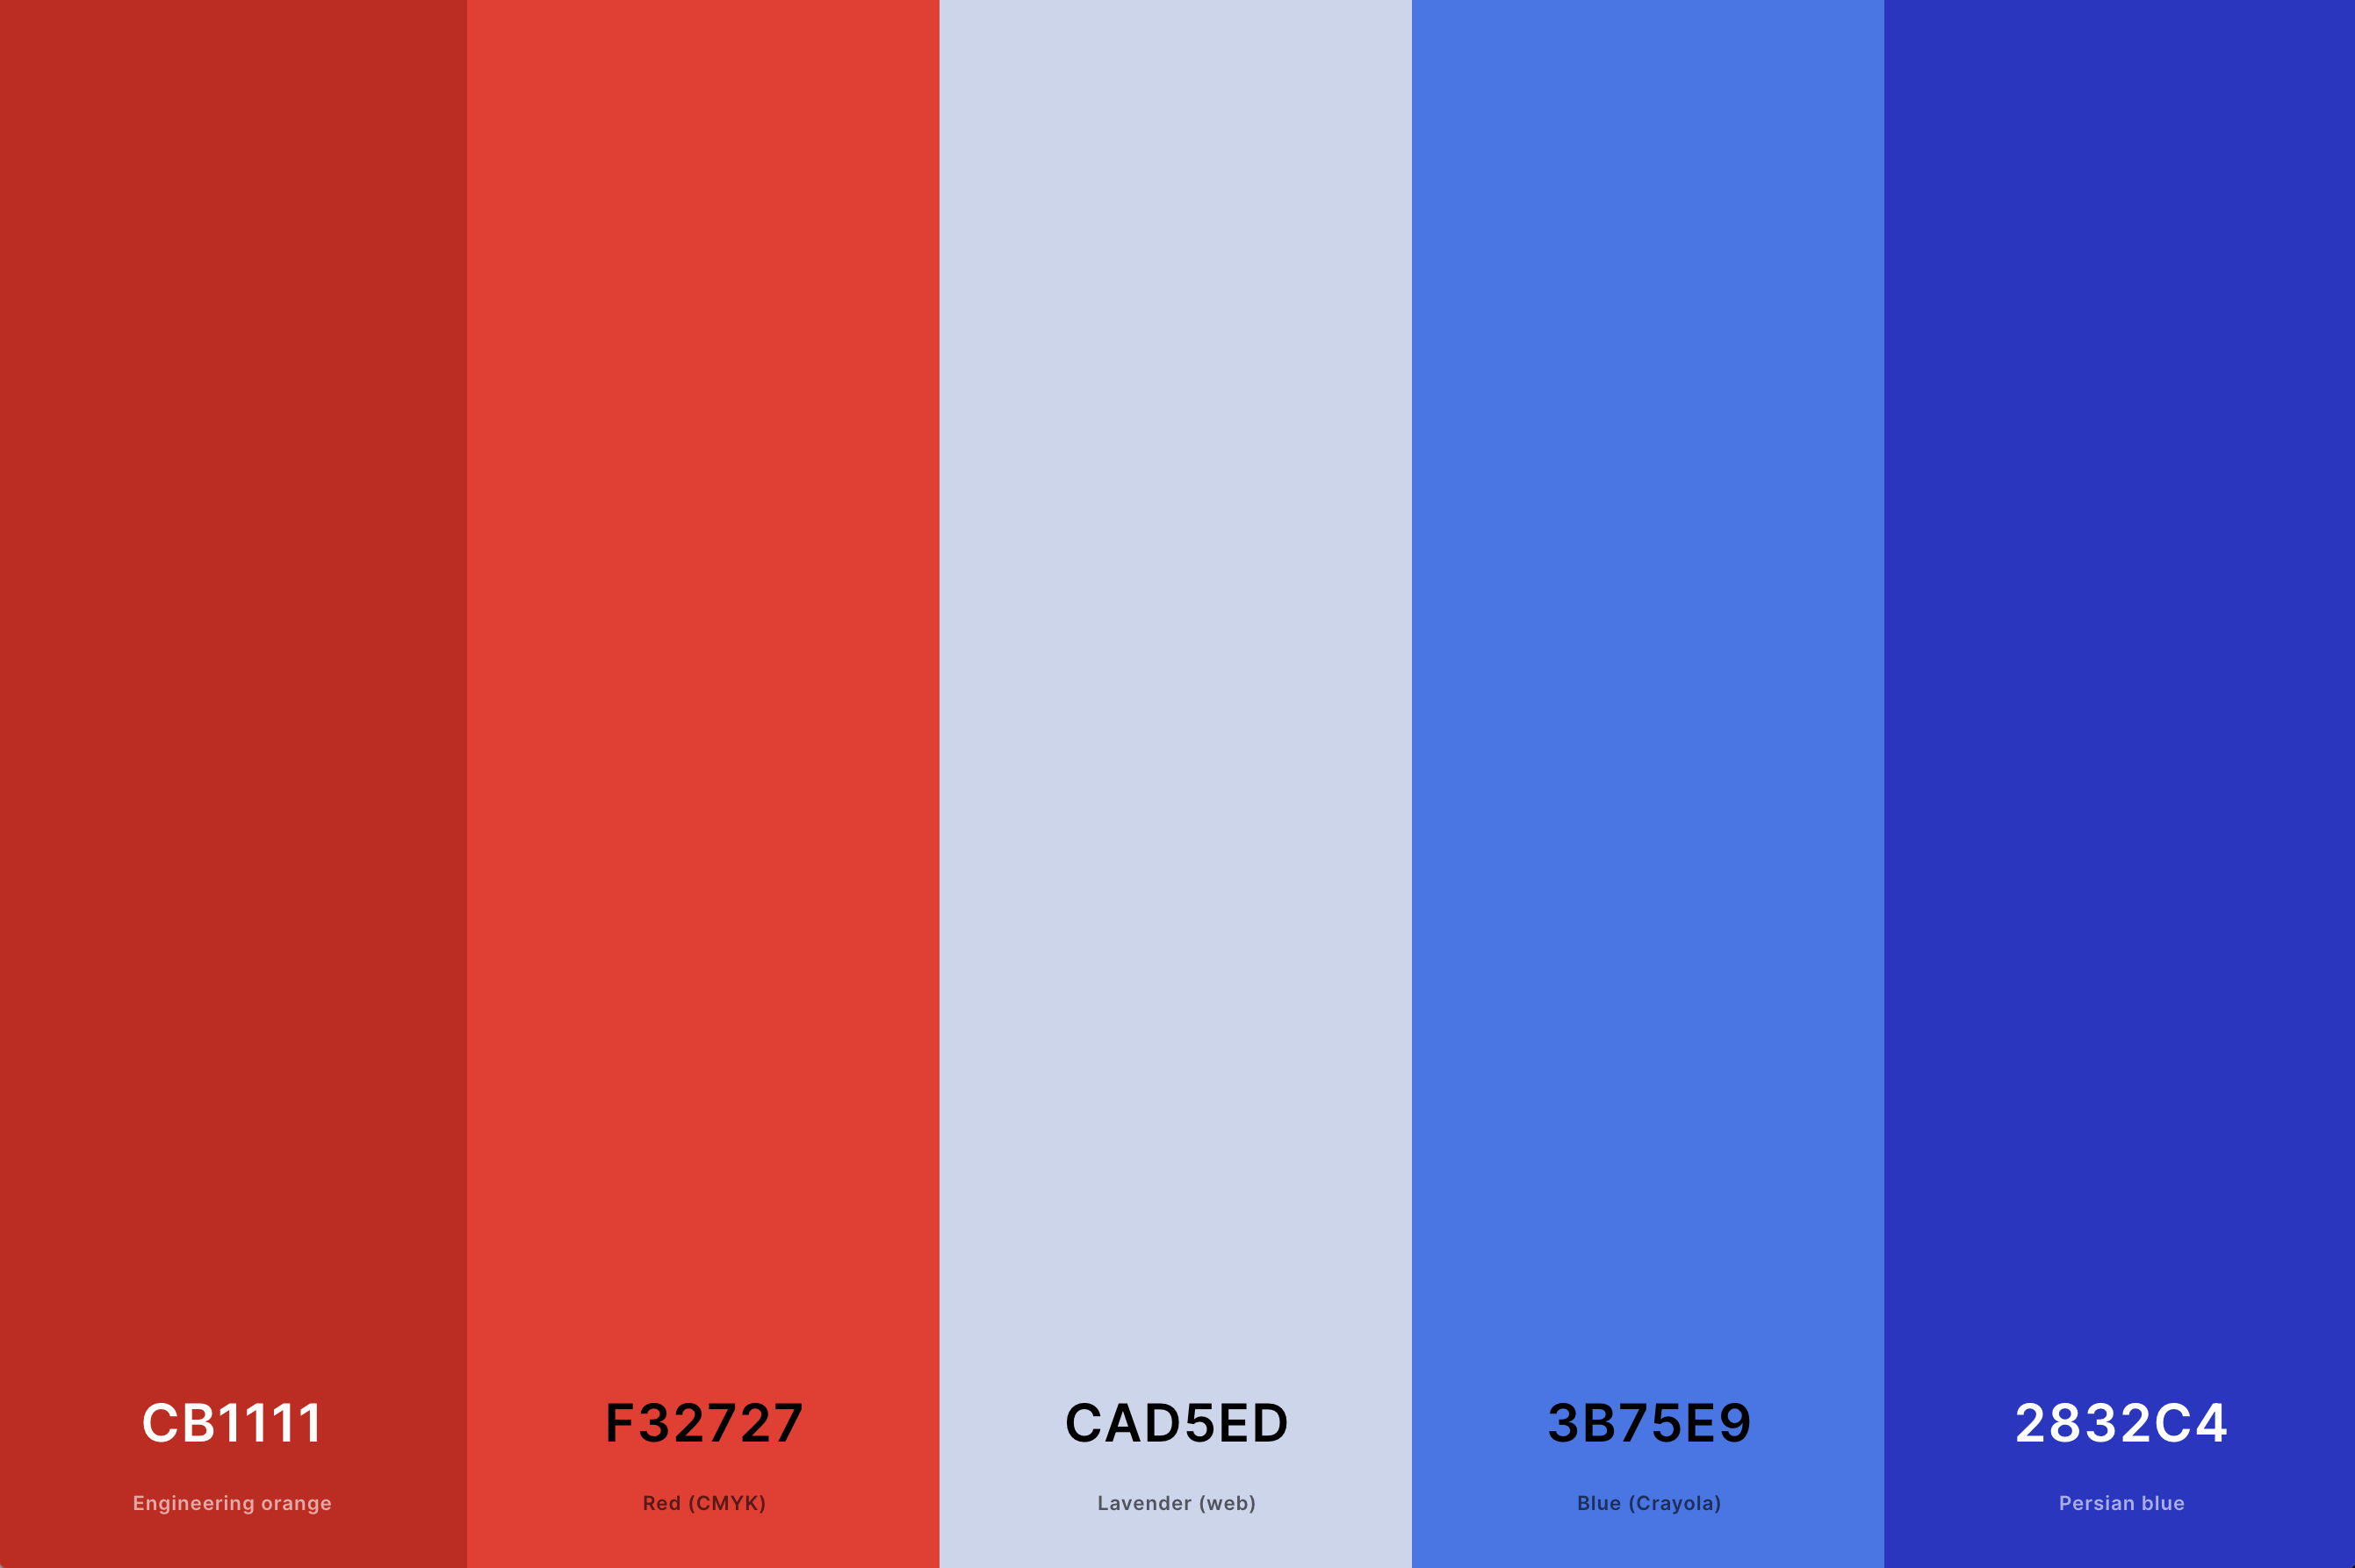 2. Red And Blue Color Palette Color Palette with Engineering Orange (Hex #CB1111) + Red (Cmyk) (Hex #F32727) + Lavender (Web) (Hex #CAD5ED) + Blue (Crayola) (Hex #3B75E9) + Persian Blue (Hex #2832C4) Color Palette with Hex Codes